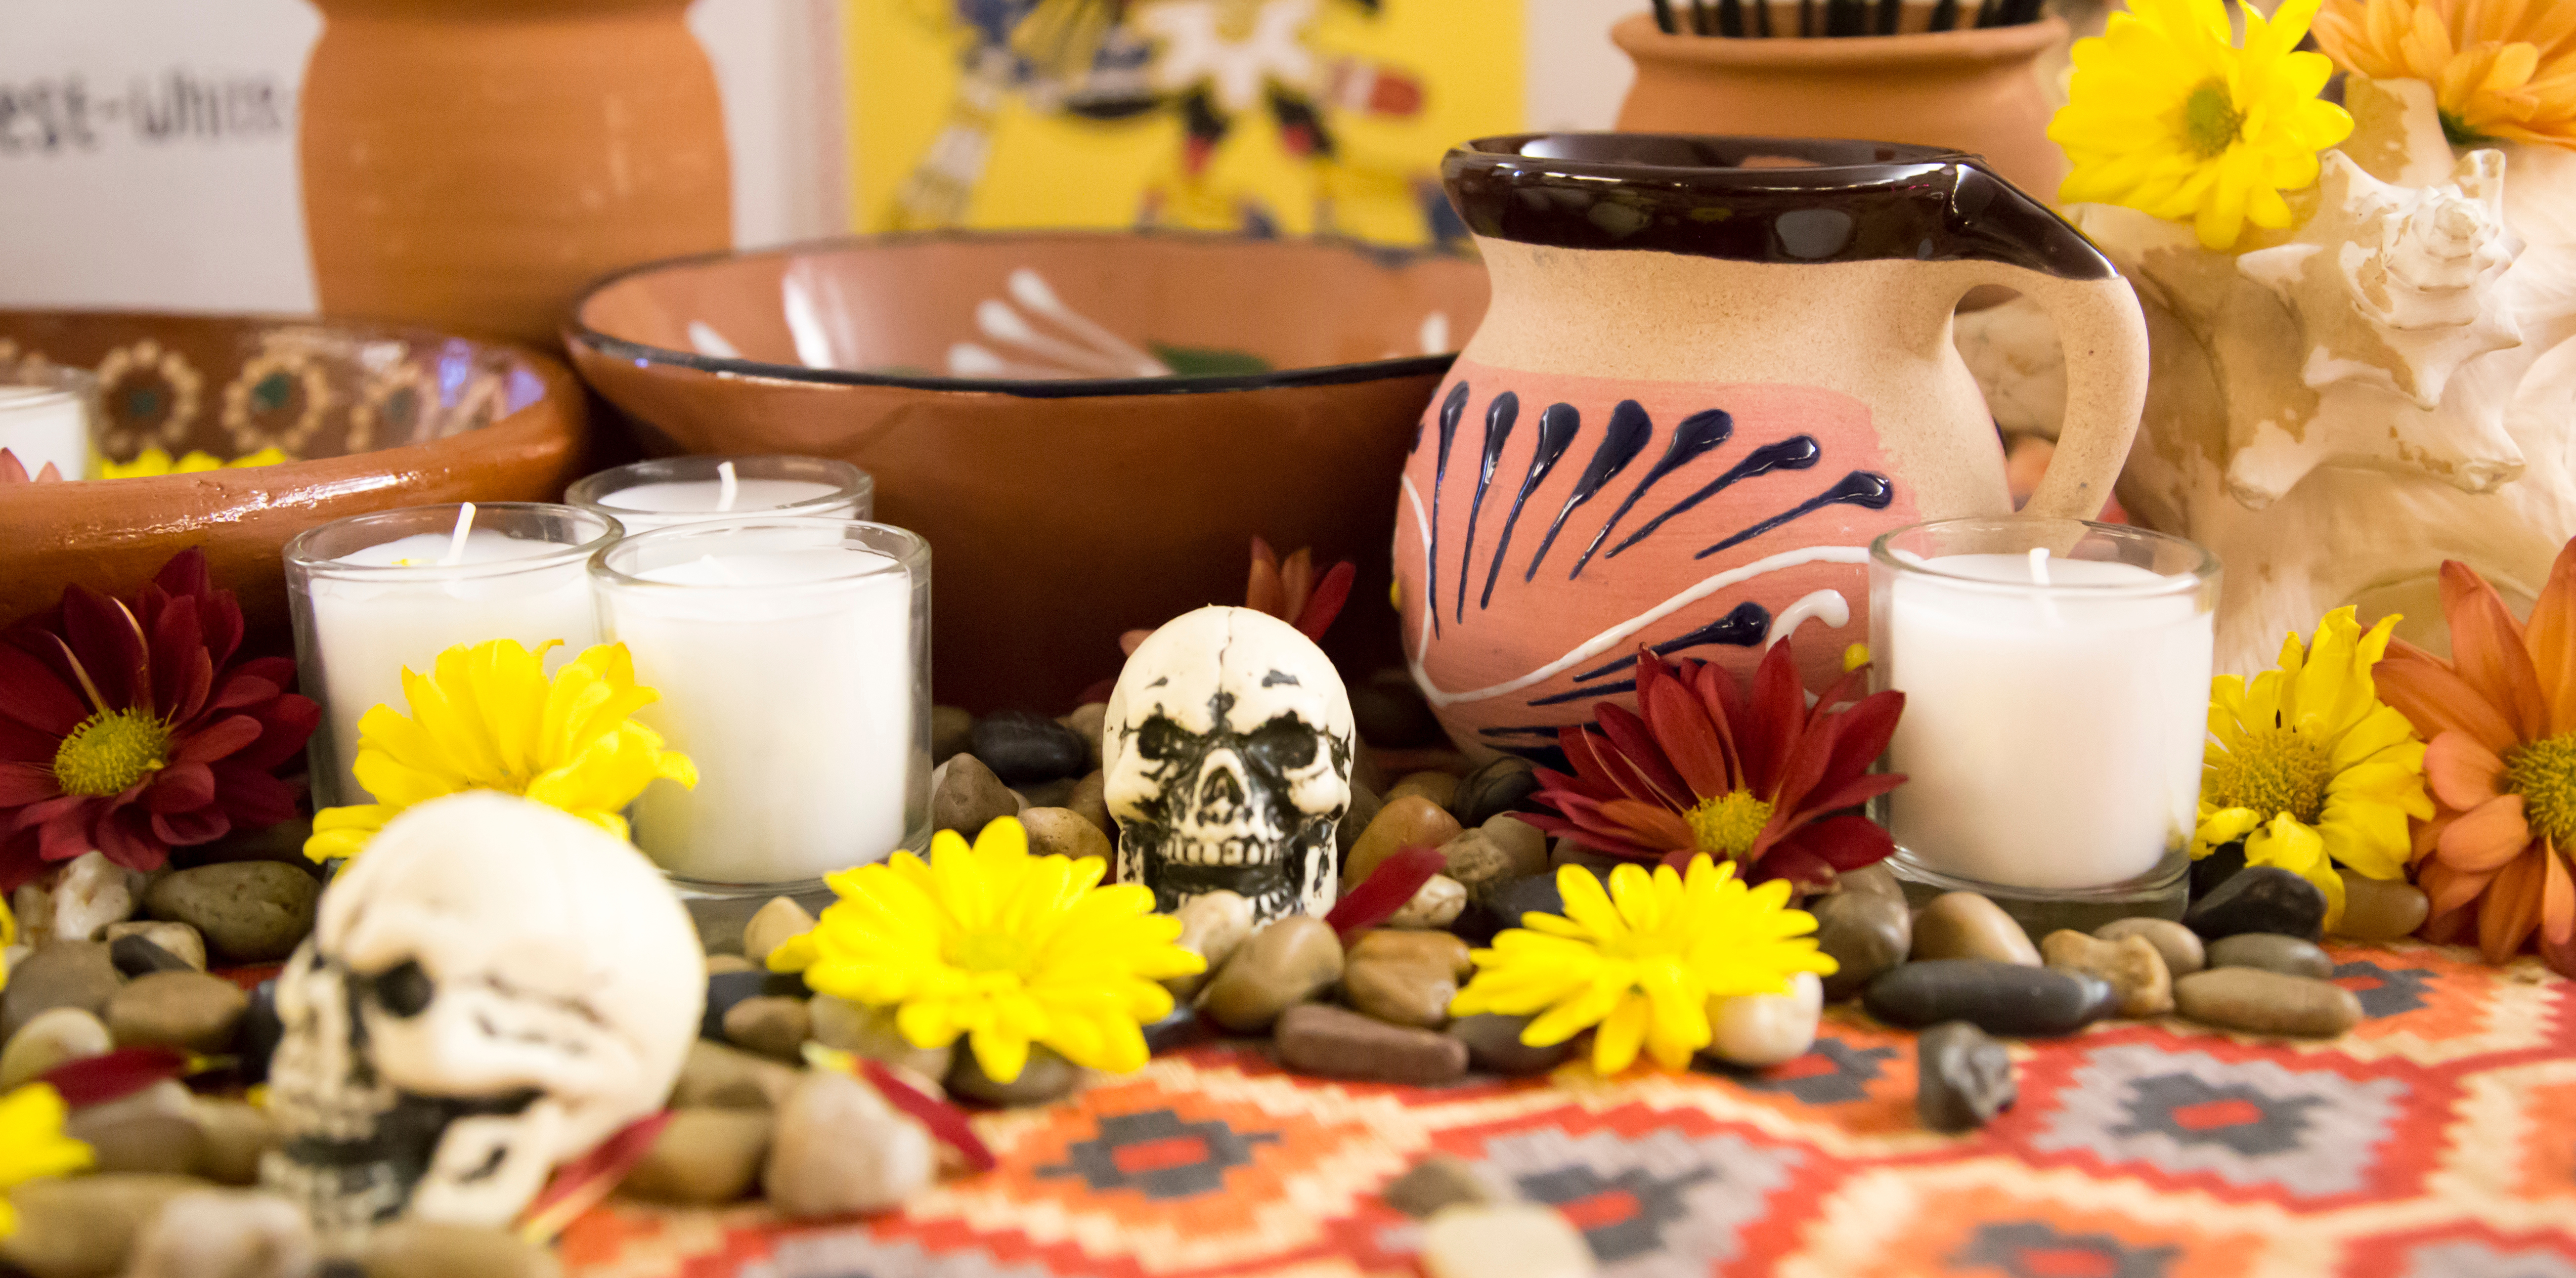 skulls and colorful decorations on a table